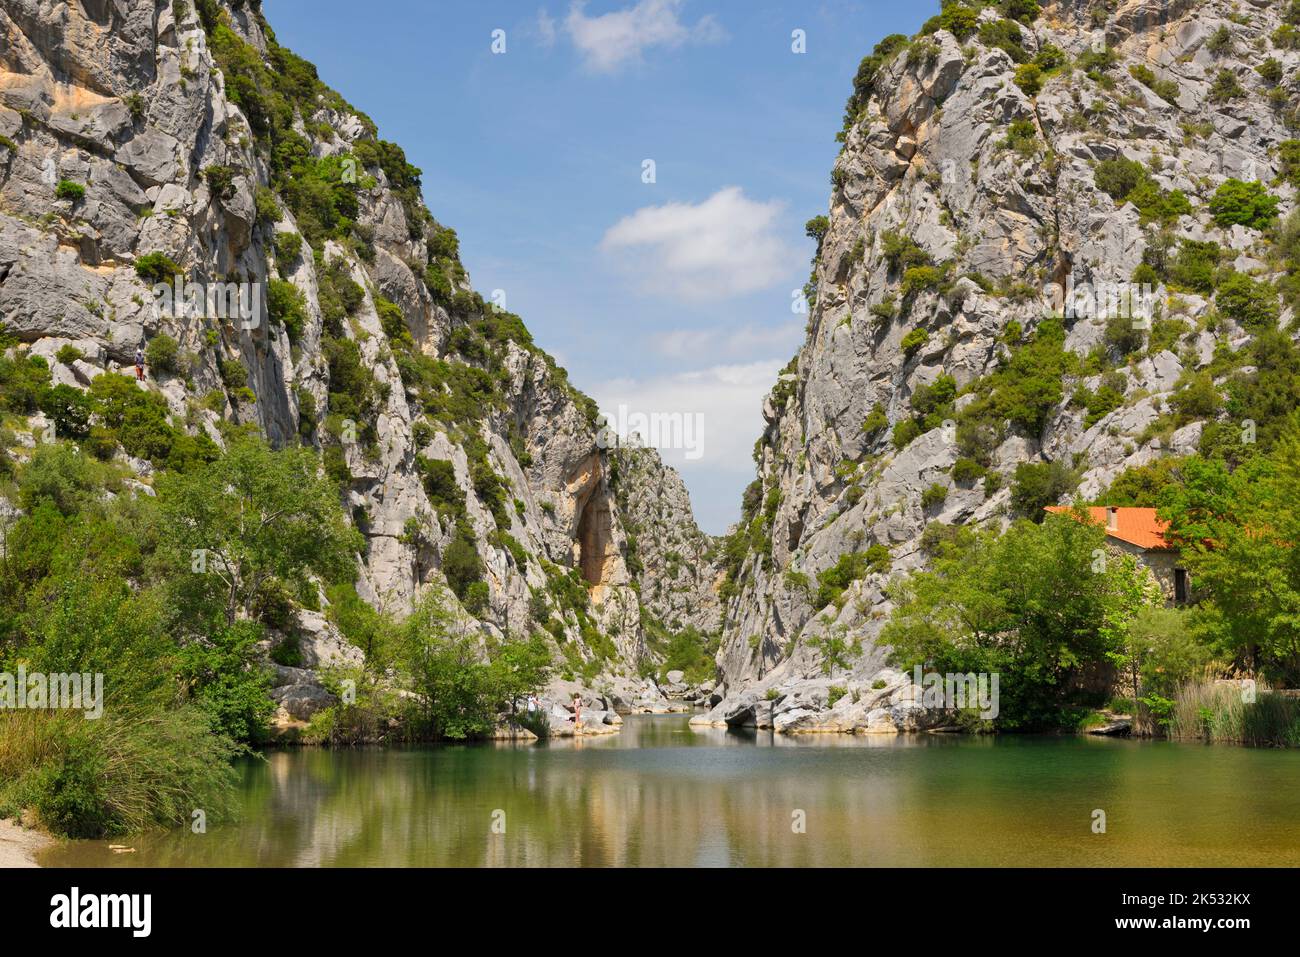 France, Pyrenees Orientales, Tautavel, The Gorges du Gouleyrous and the Verdouble River overlooked by the caune de l'Arago, the famous cave where the Stock Photo